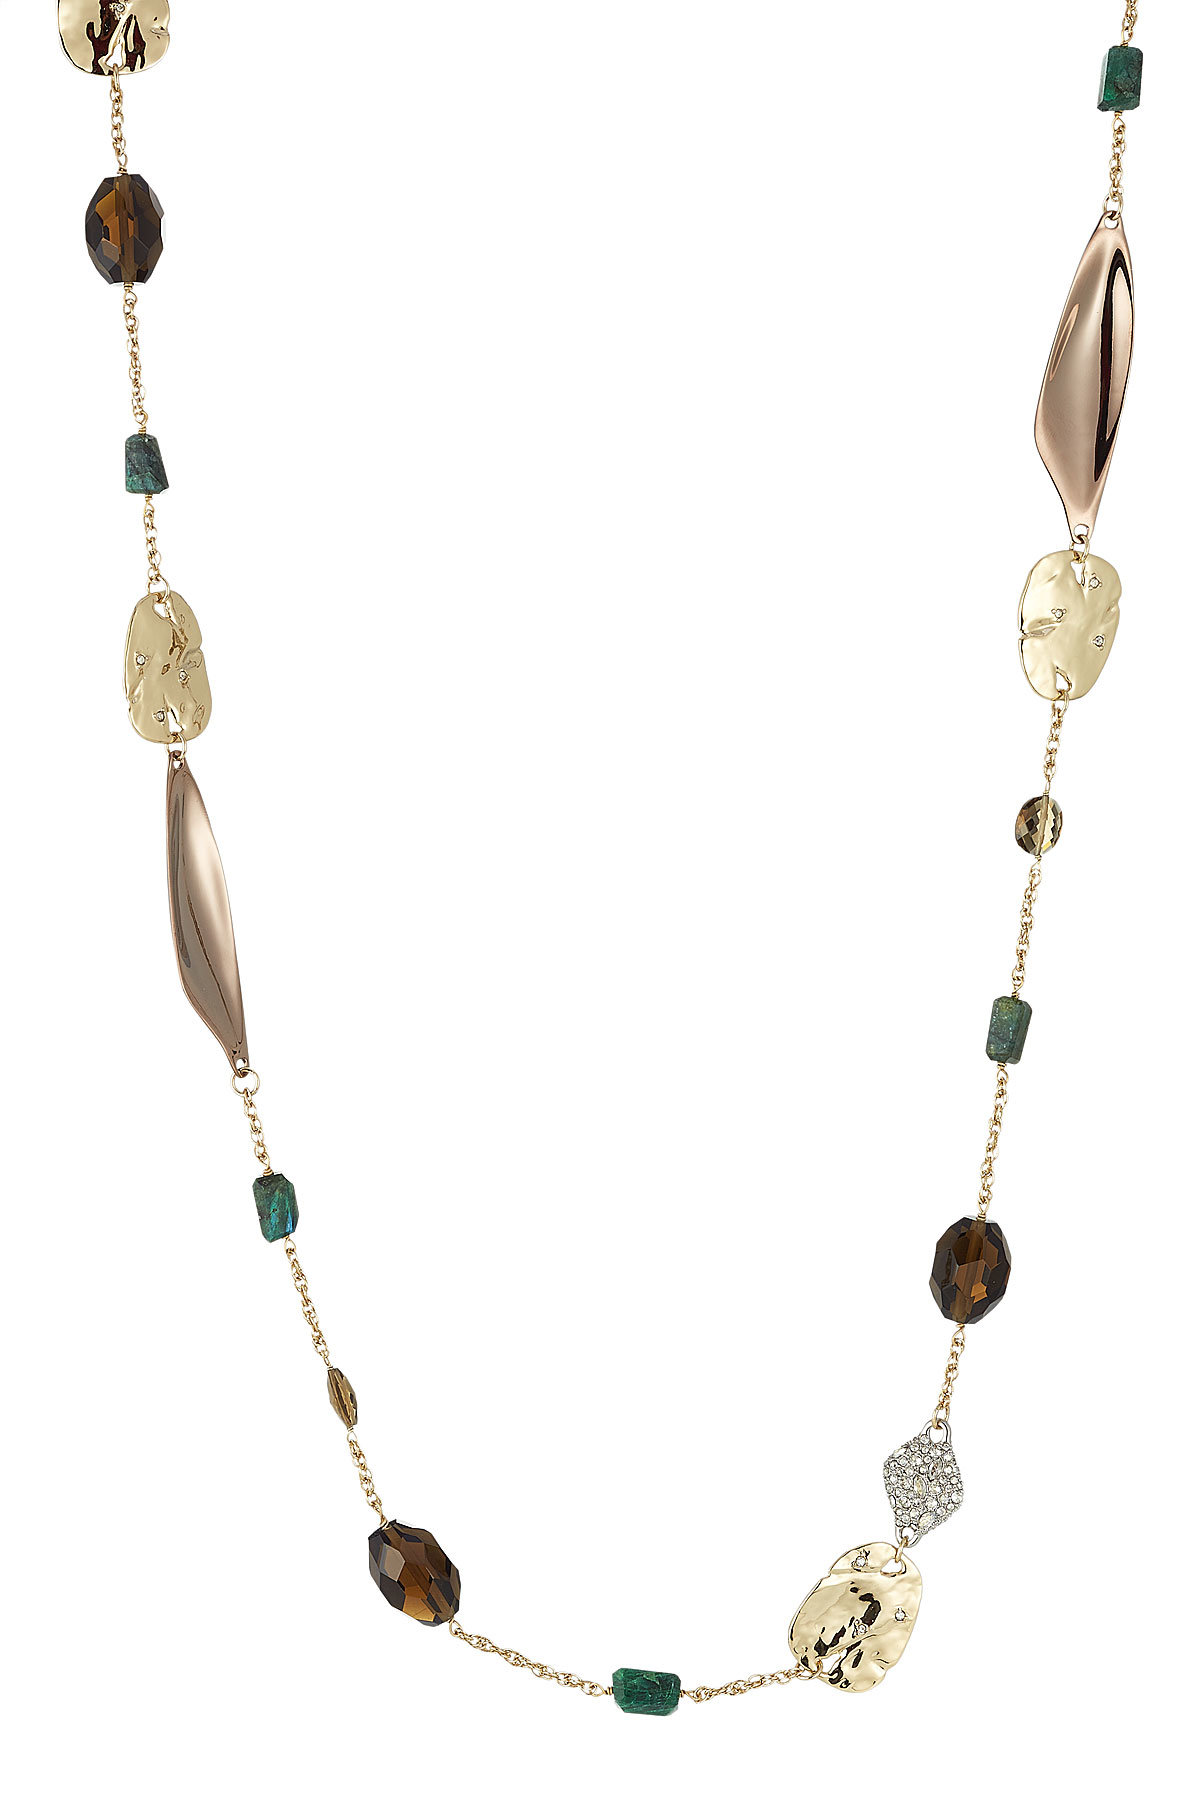 Alexis Bittar - 10kt Gold Necklace with Pyrite and Crystals